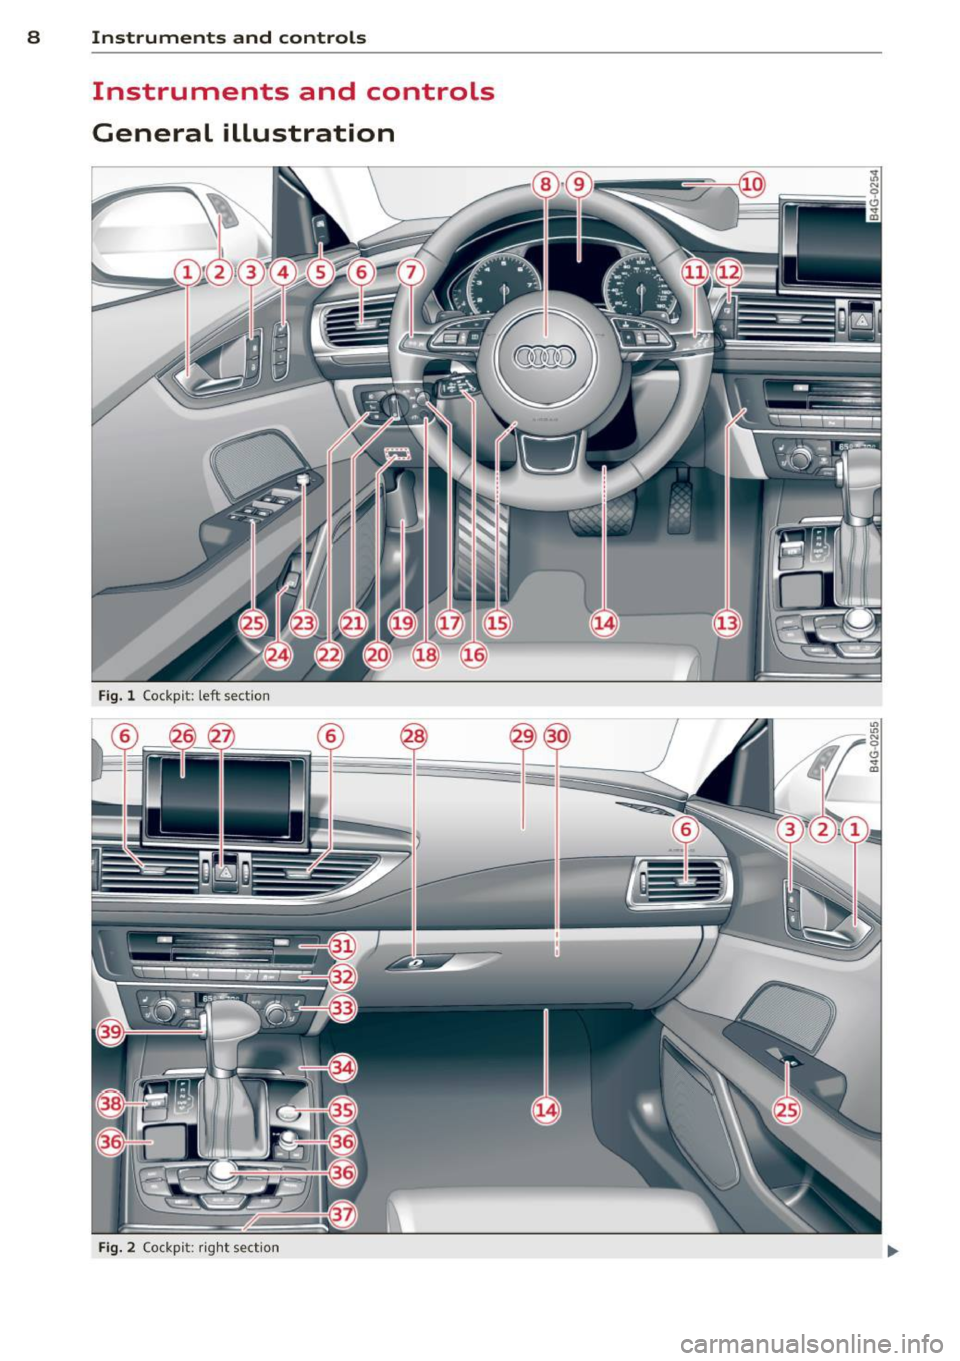 AUDI S7 2015  Owners Manual 8  Instruments and controls 
Instruments  and  controls 
General  illustration 
Fig. l Cockp it:  left  sect io n 
Fig. 2 Co ck pi t: ri ght  sect io n  